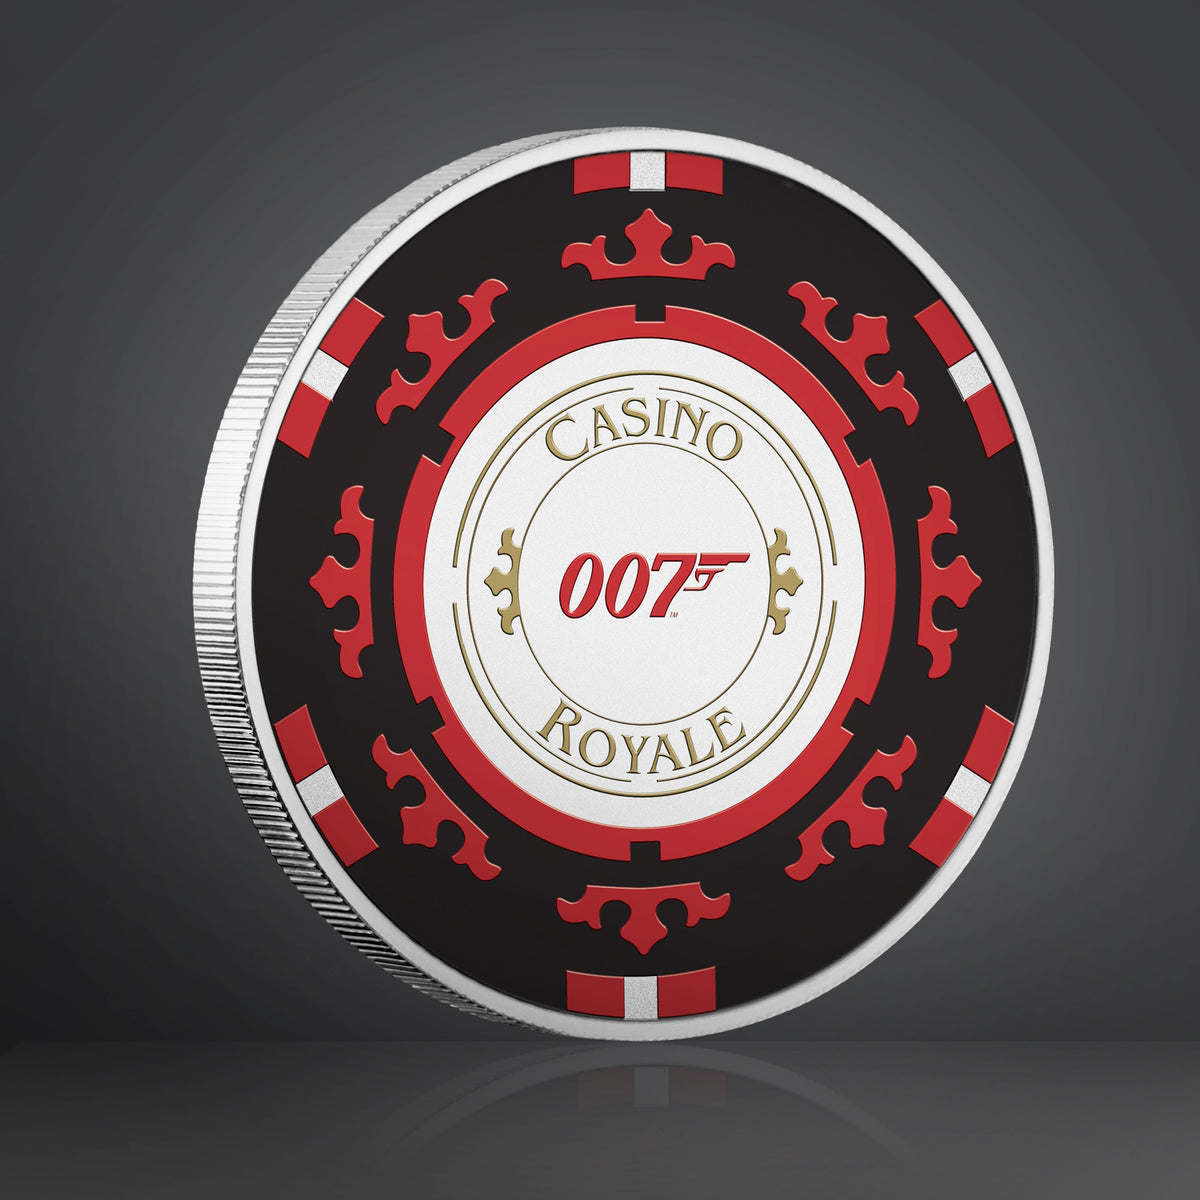 James Bond 1oz Silver Casino Chip Coloured Coin - Casino Royale Limited Edition - By The Perth Mint